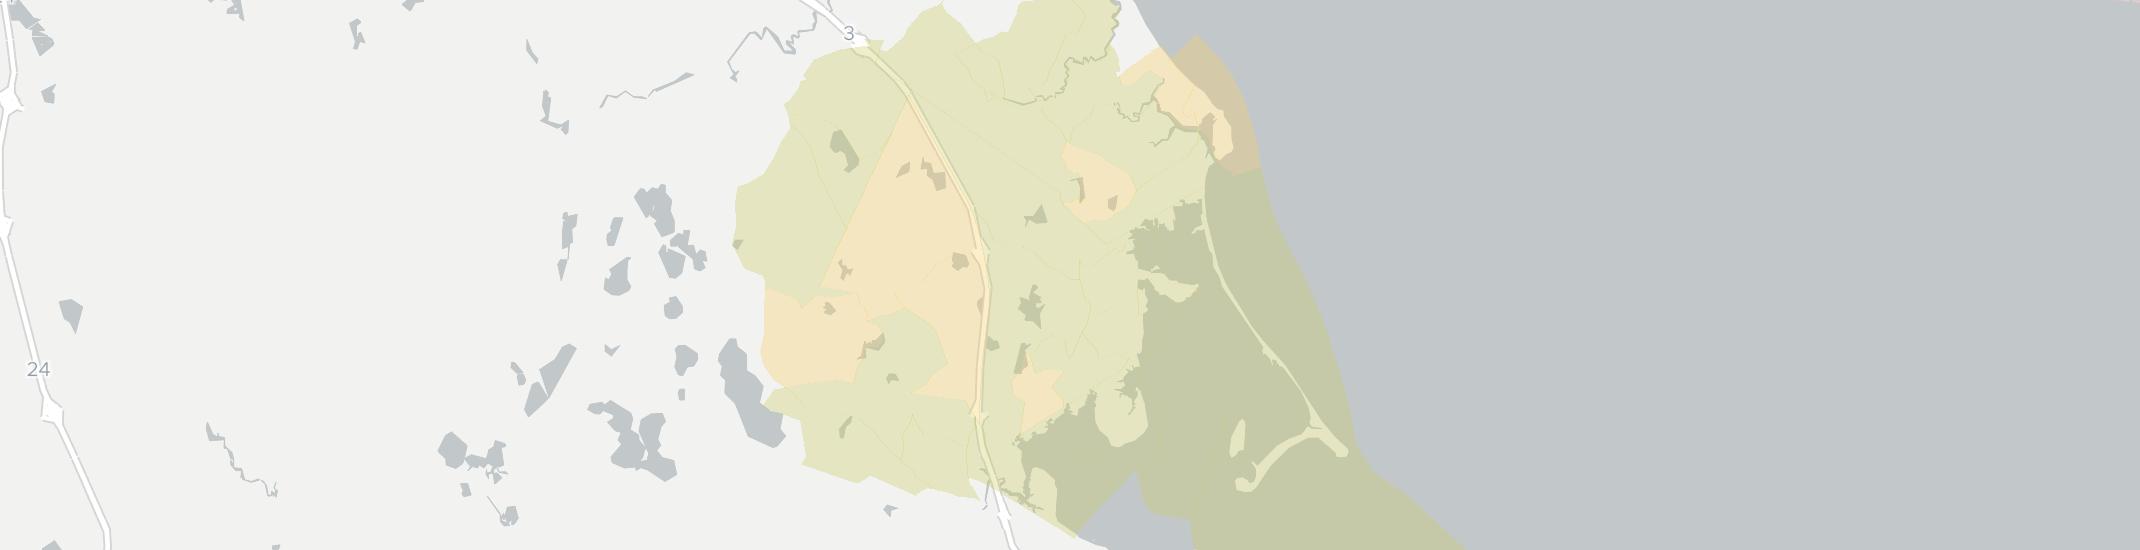 Duxbury Internet Competition Map. Click for interactive map.